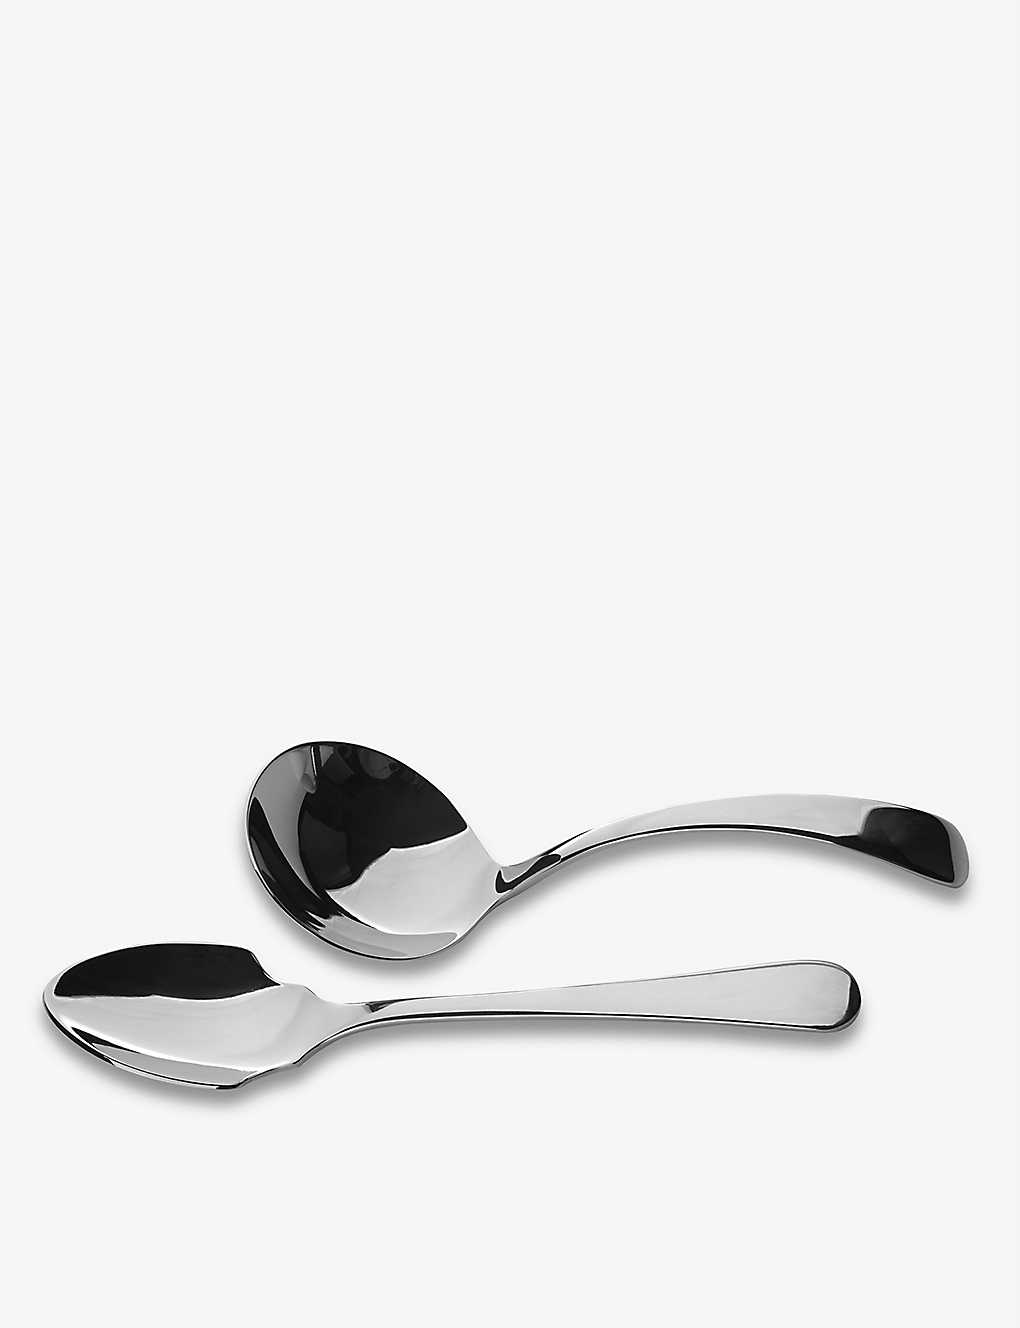 Shop Arthur Price Stainless Steel Vintage Stainless Steel Cream And Jam Spoon Set